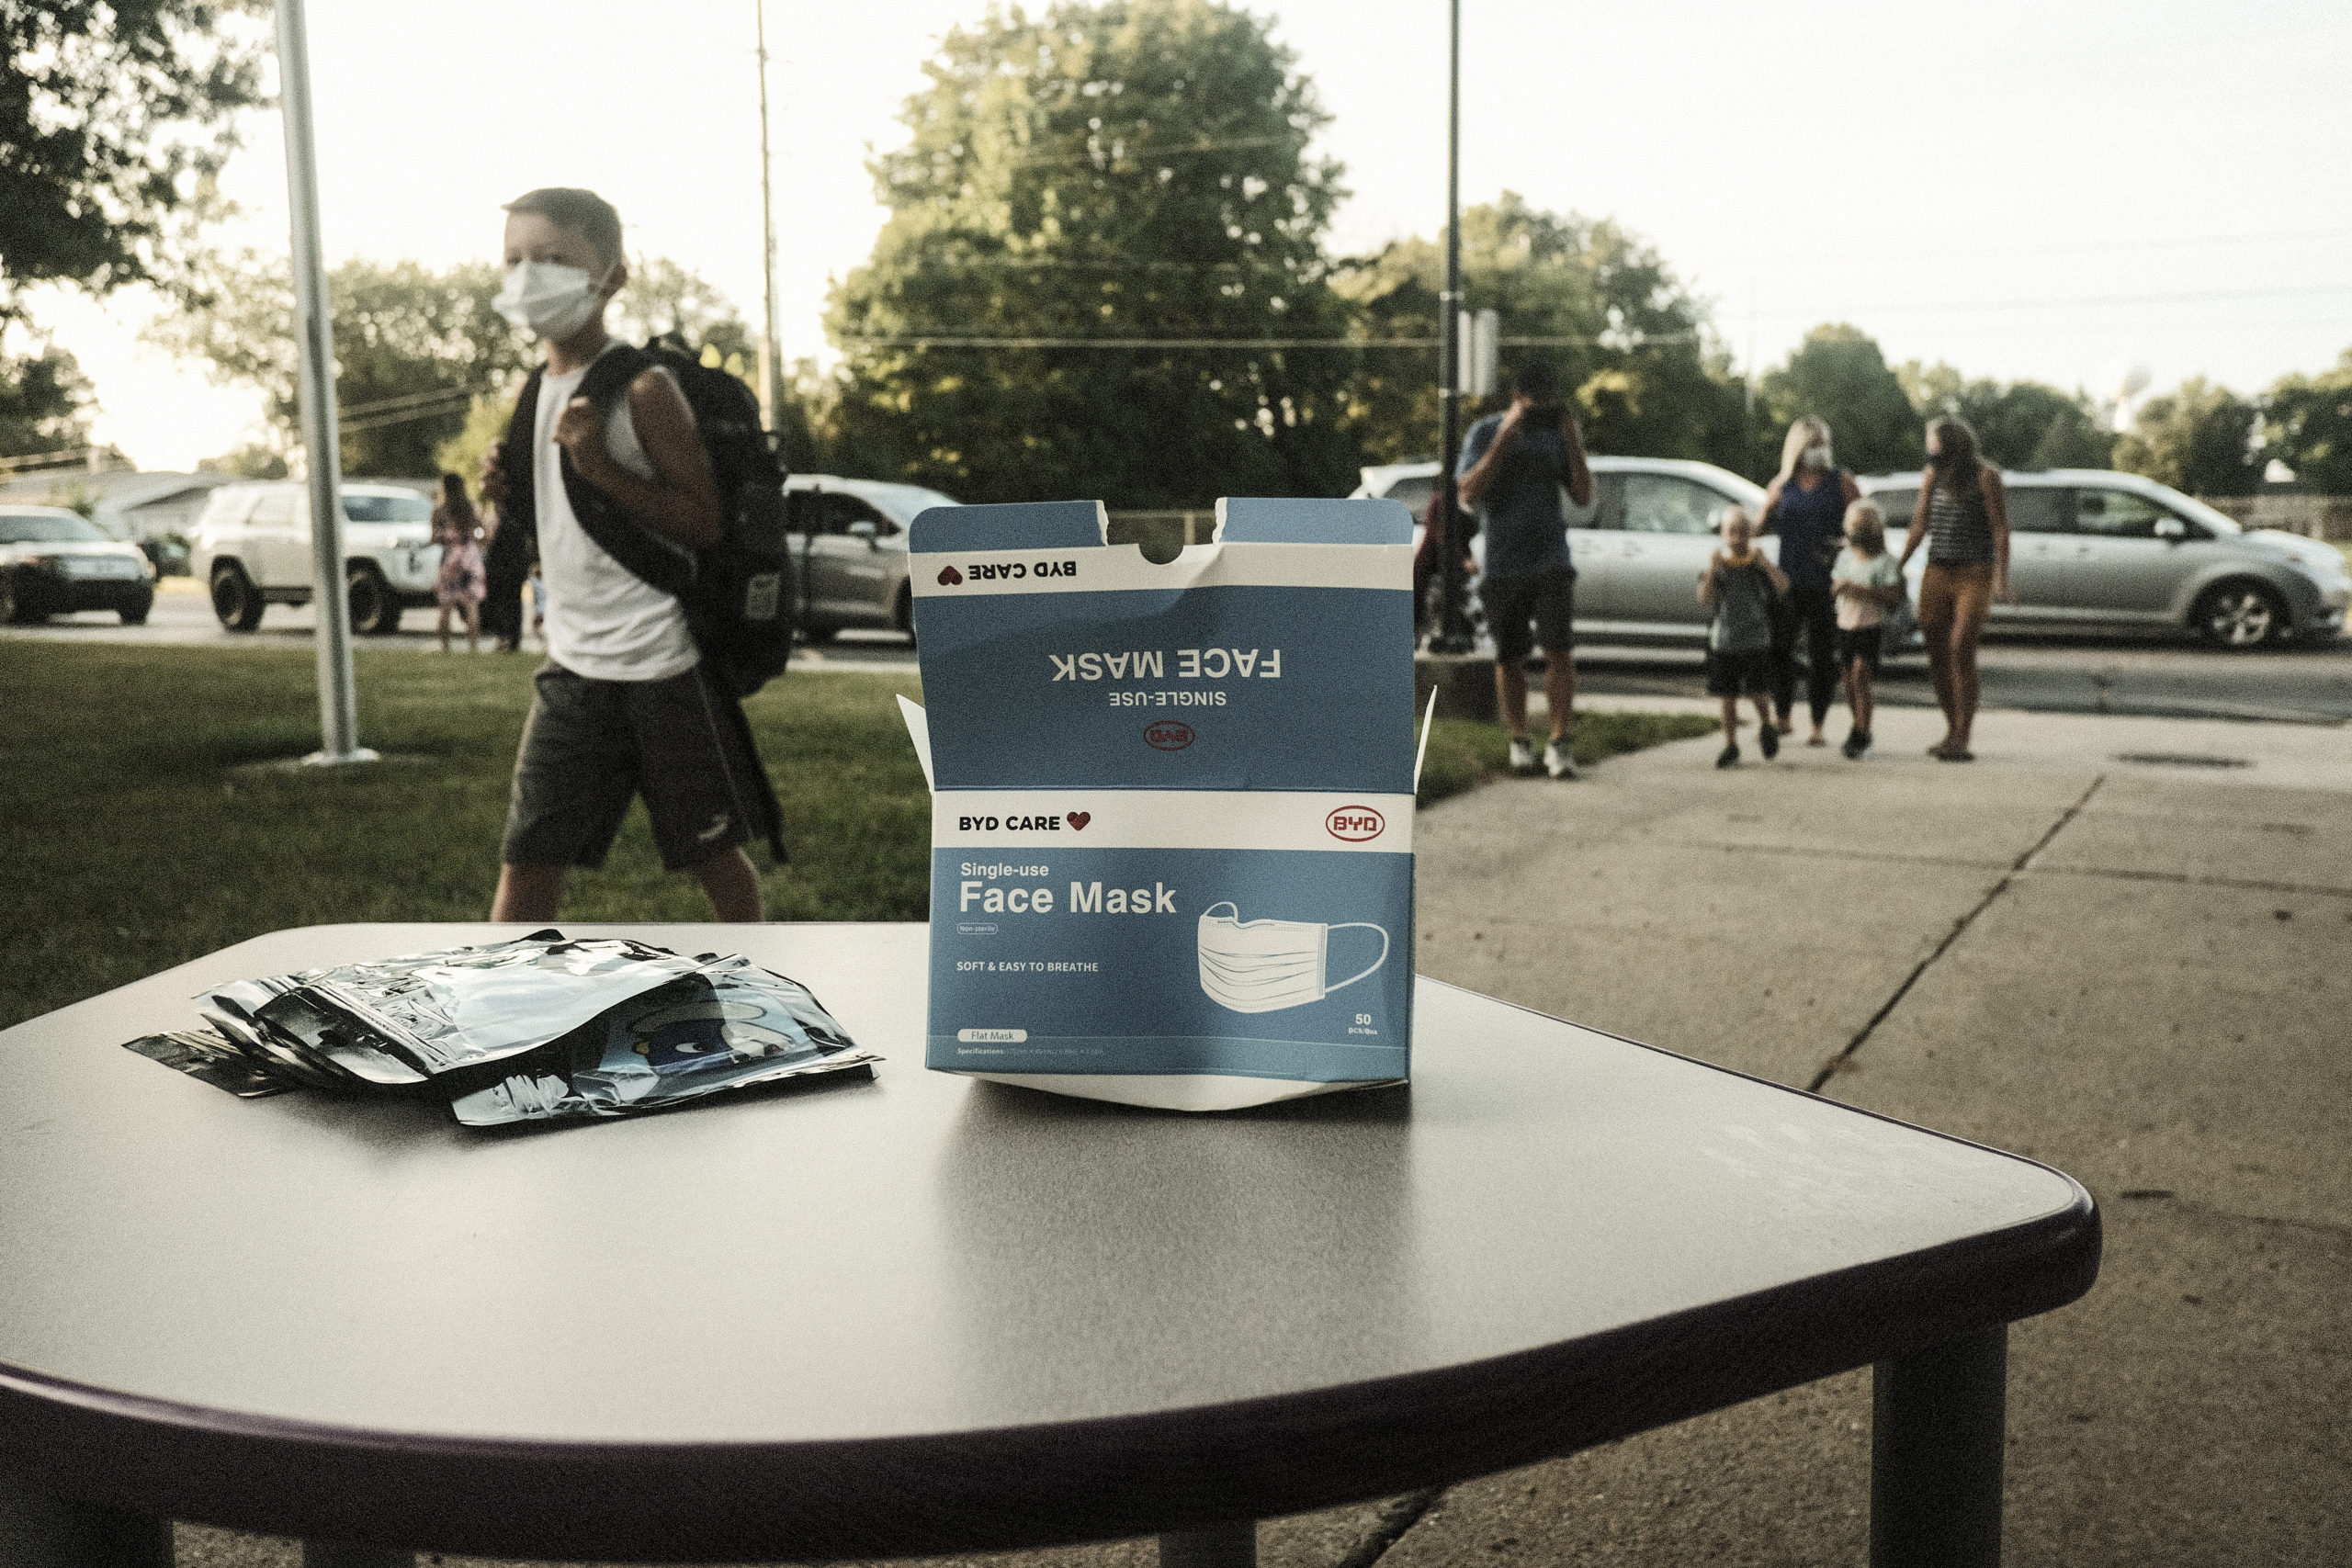 Face masks sit on a table outside of Schoolcraft Elementary for students and parents to wear when entering the building on the first day of school on August 30, 2021 in Schoolcraft, Michigan. The Schoolcraft Community School district, like many school districts throughout the country are adapting to mask mandates for teachers and students due to the current surge of Covid-19 cases. (Photo by Matthew Hatcher/Getty Images)